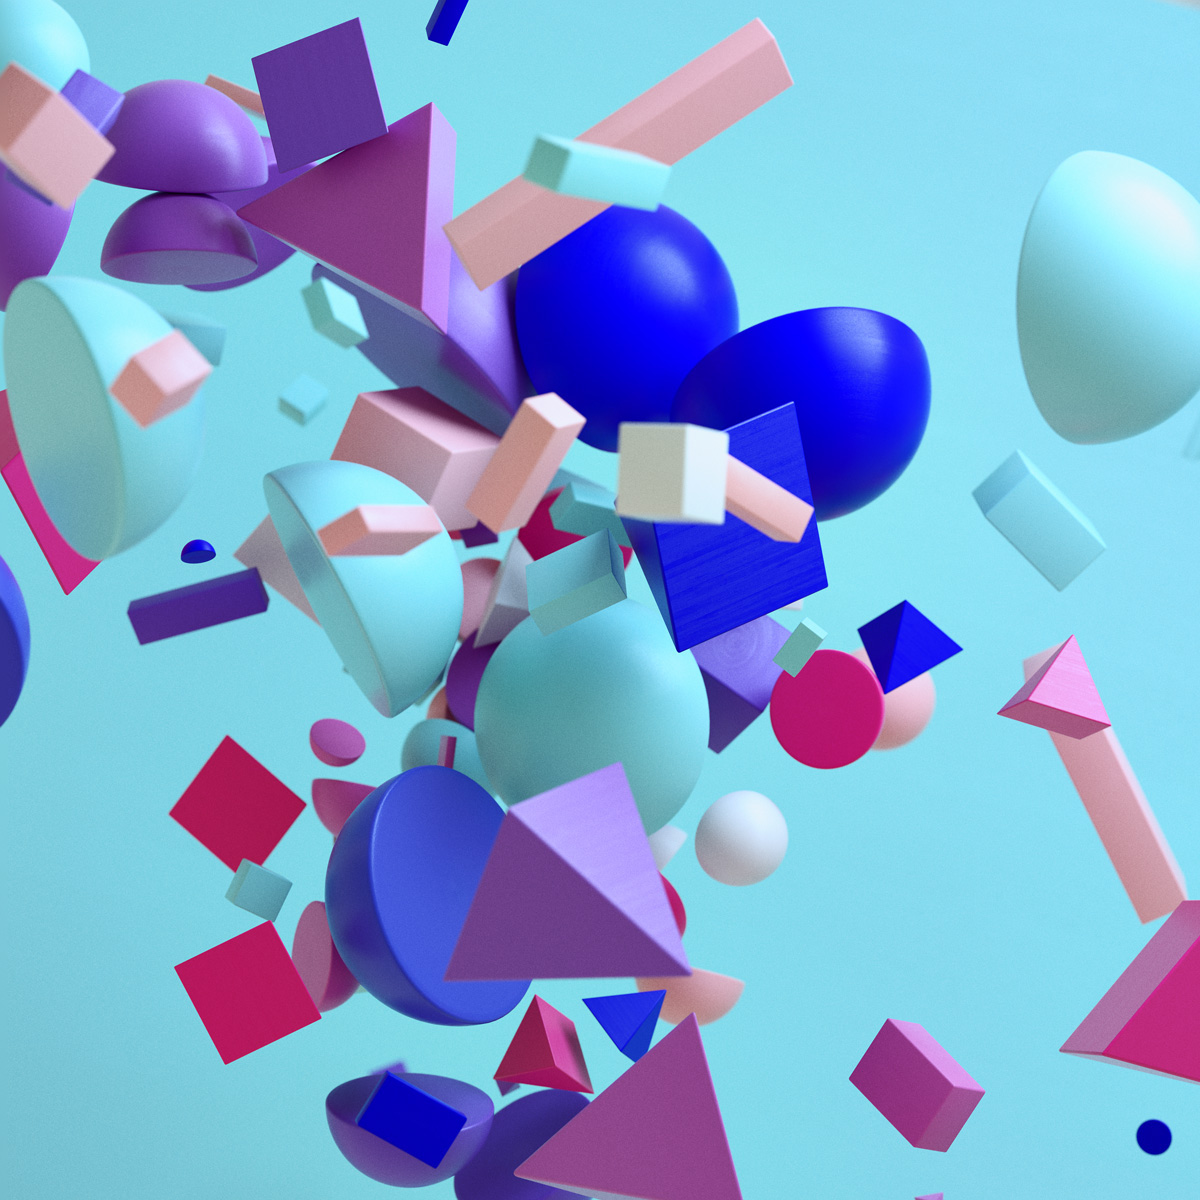 cinema 4d 3D abstract everyday Render concept tech particles